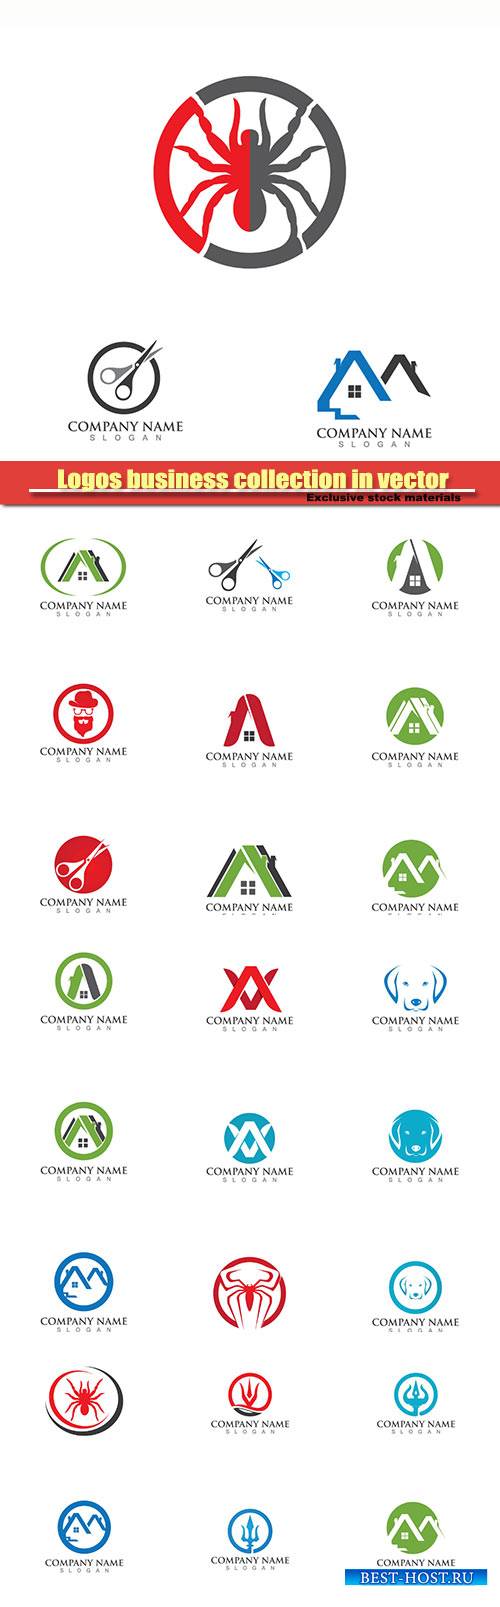 Logos business collection in vector #27